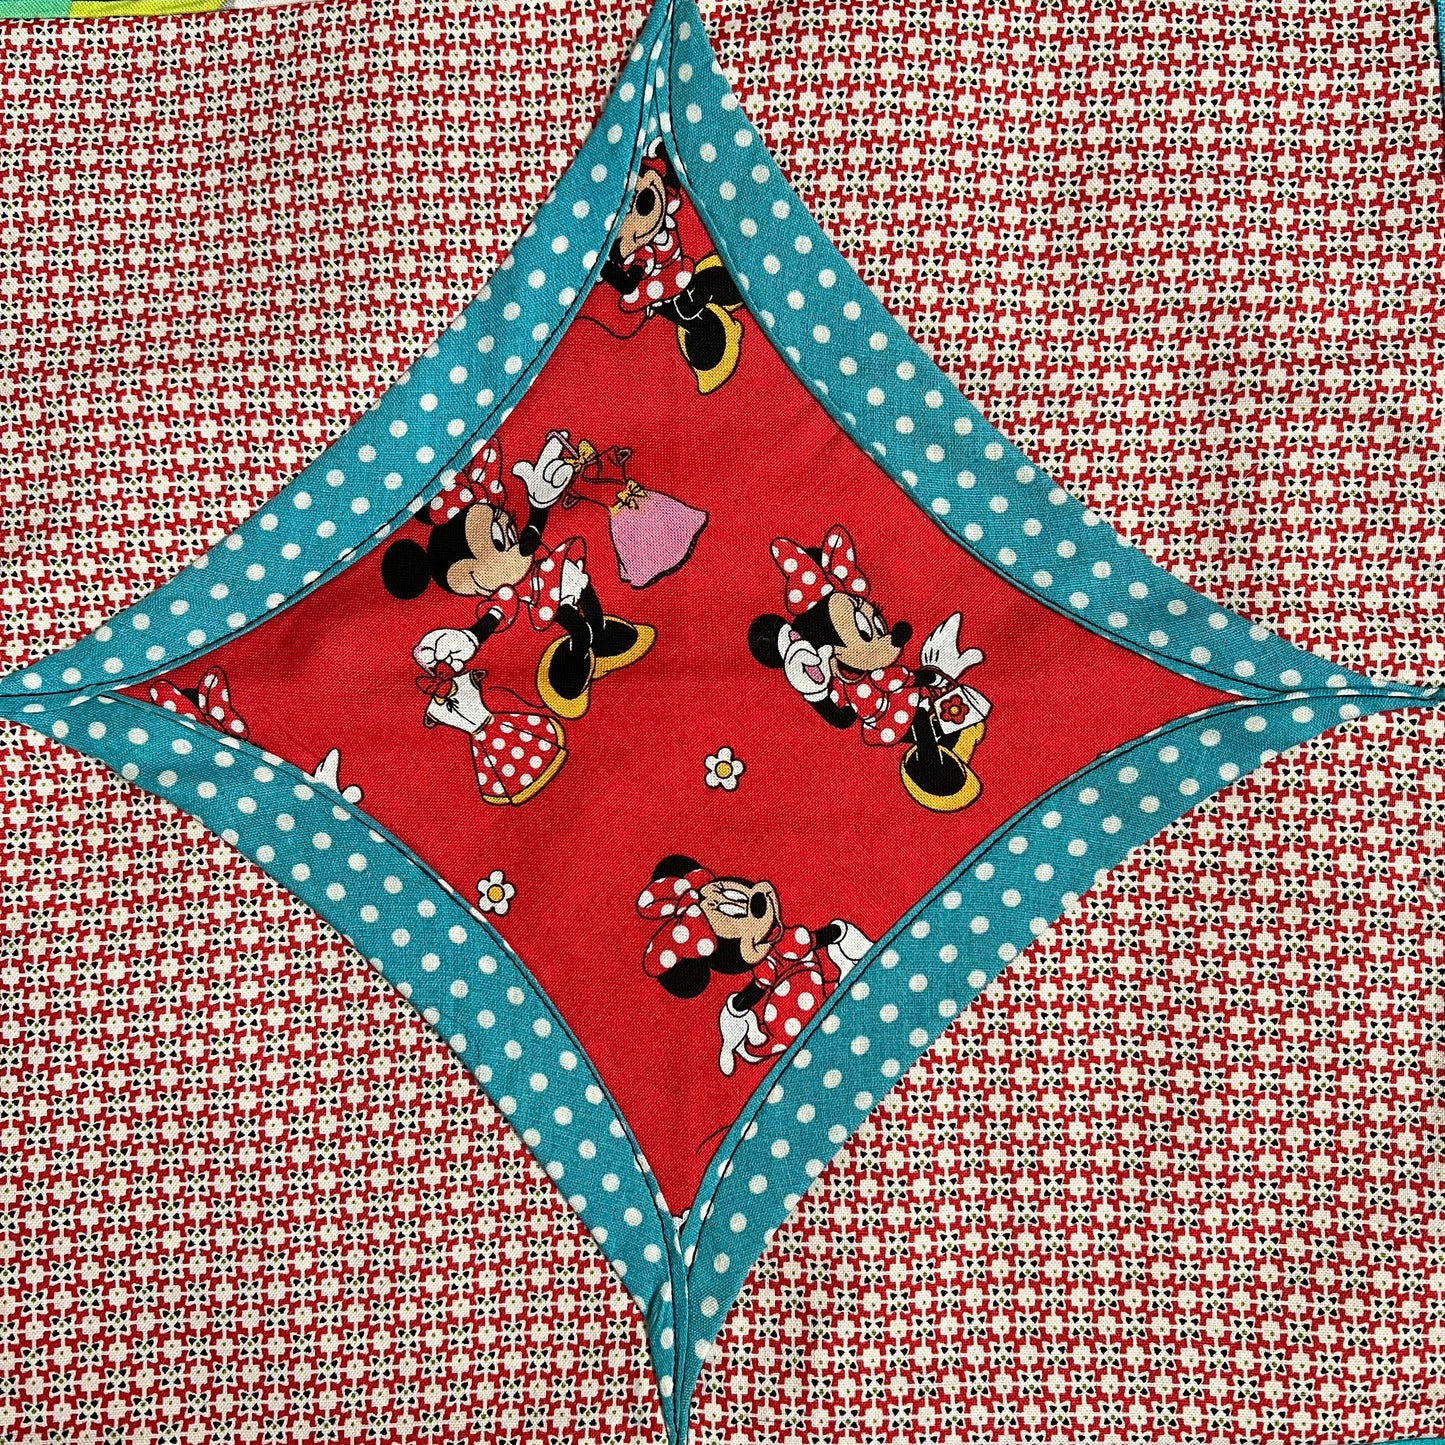 Minnie and Mickey Mouse fabric square, surrounded by blue polkadots, then red pattern fabrics